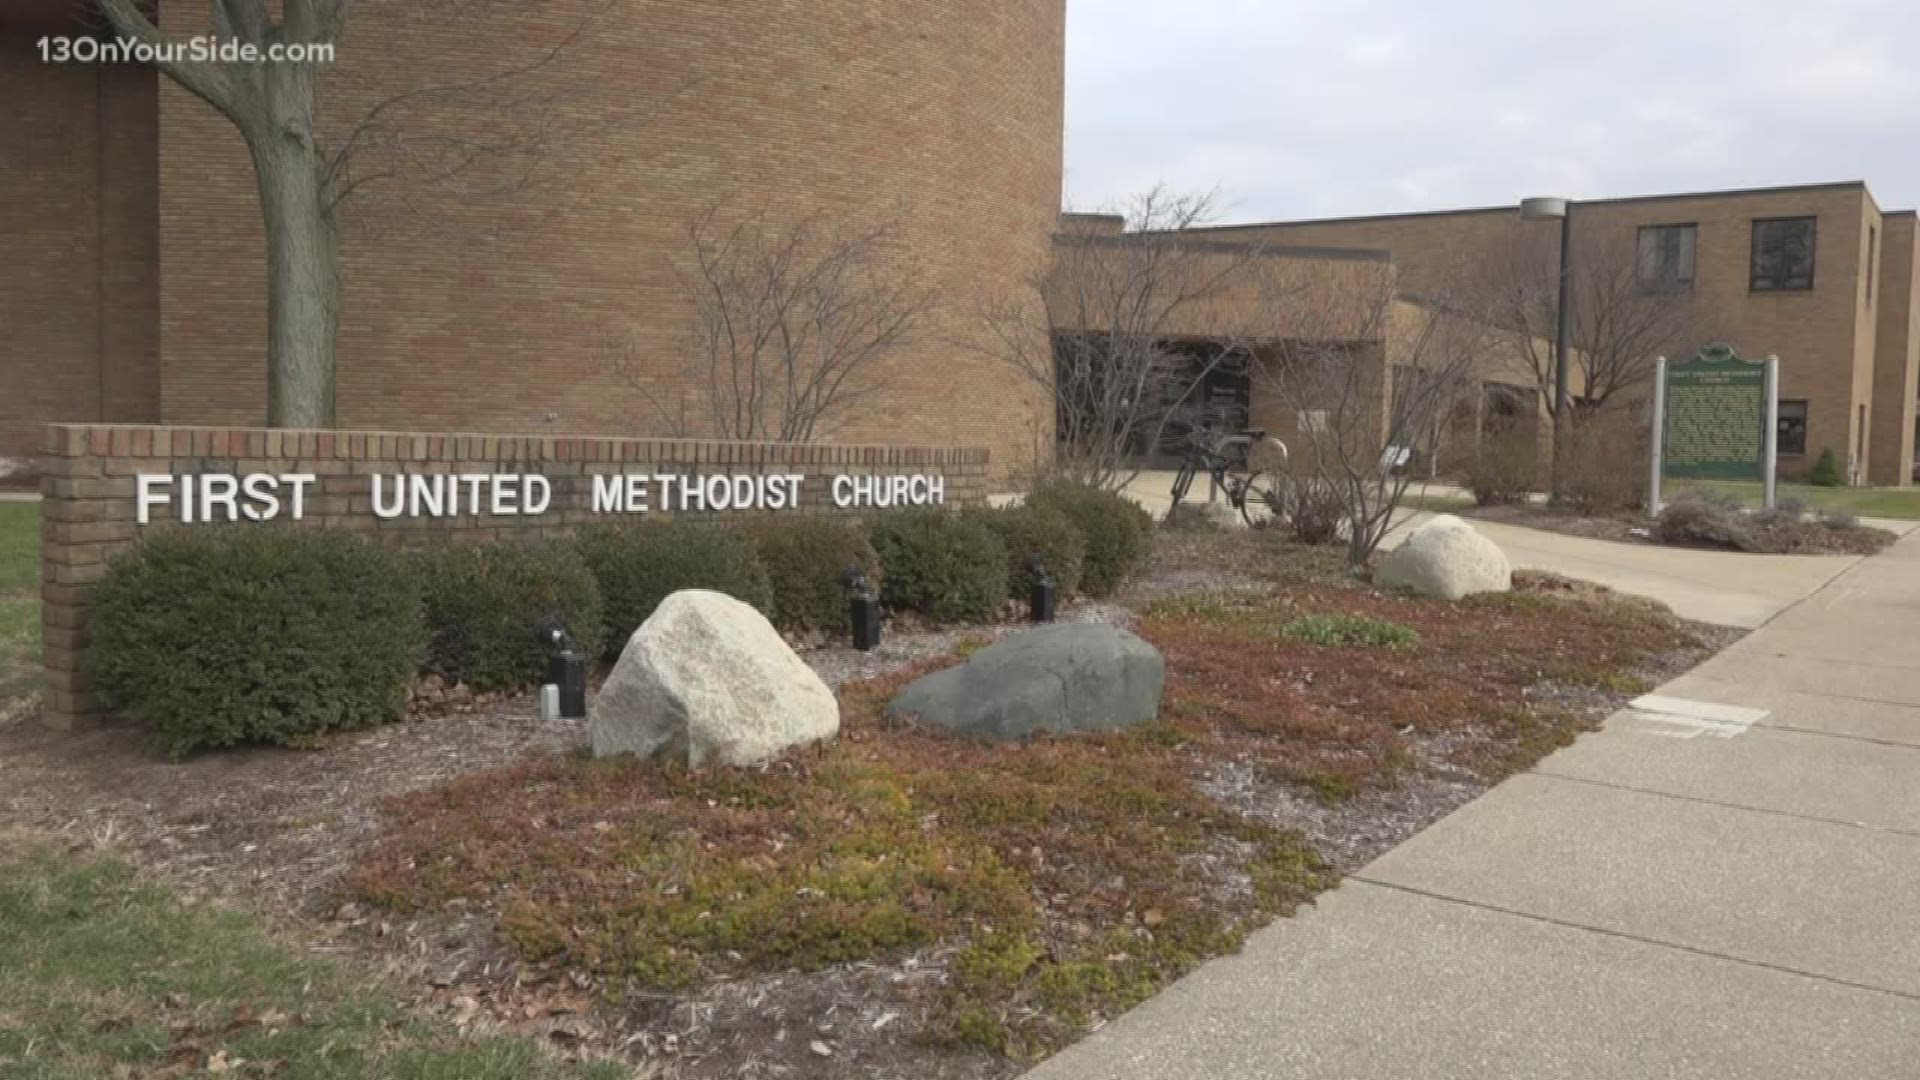 Methodist church leaders are proposing a traditional denomination to split from the progressive side of the church, over the issue of LGBTQ inclusion.